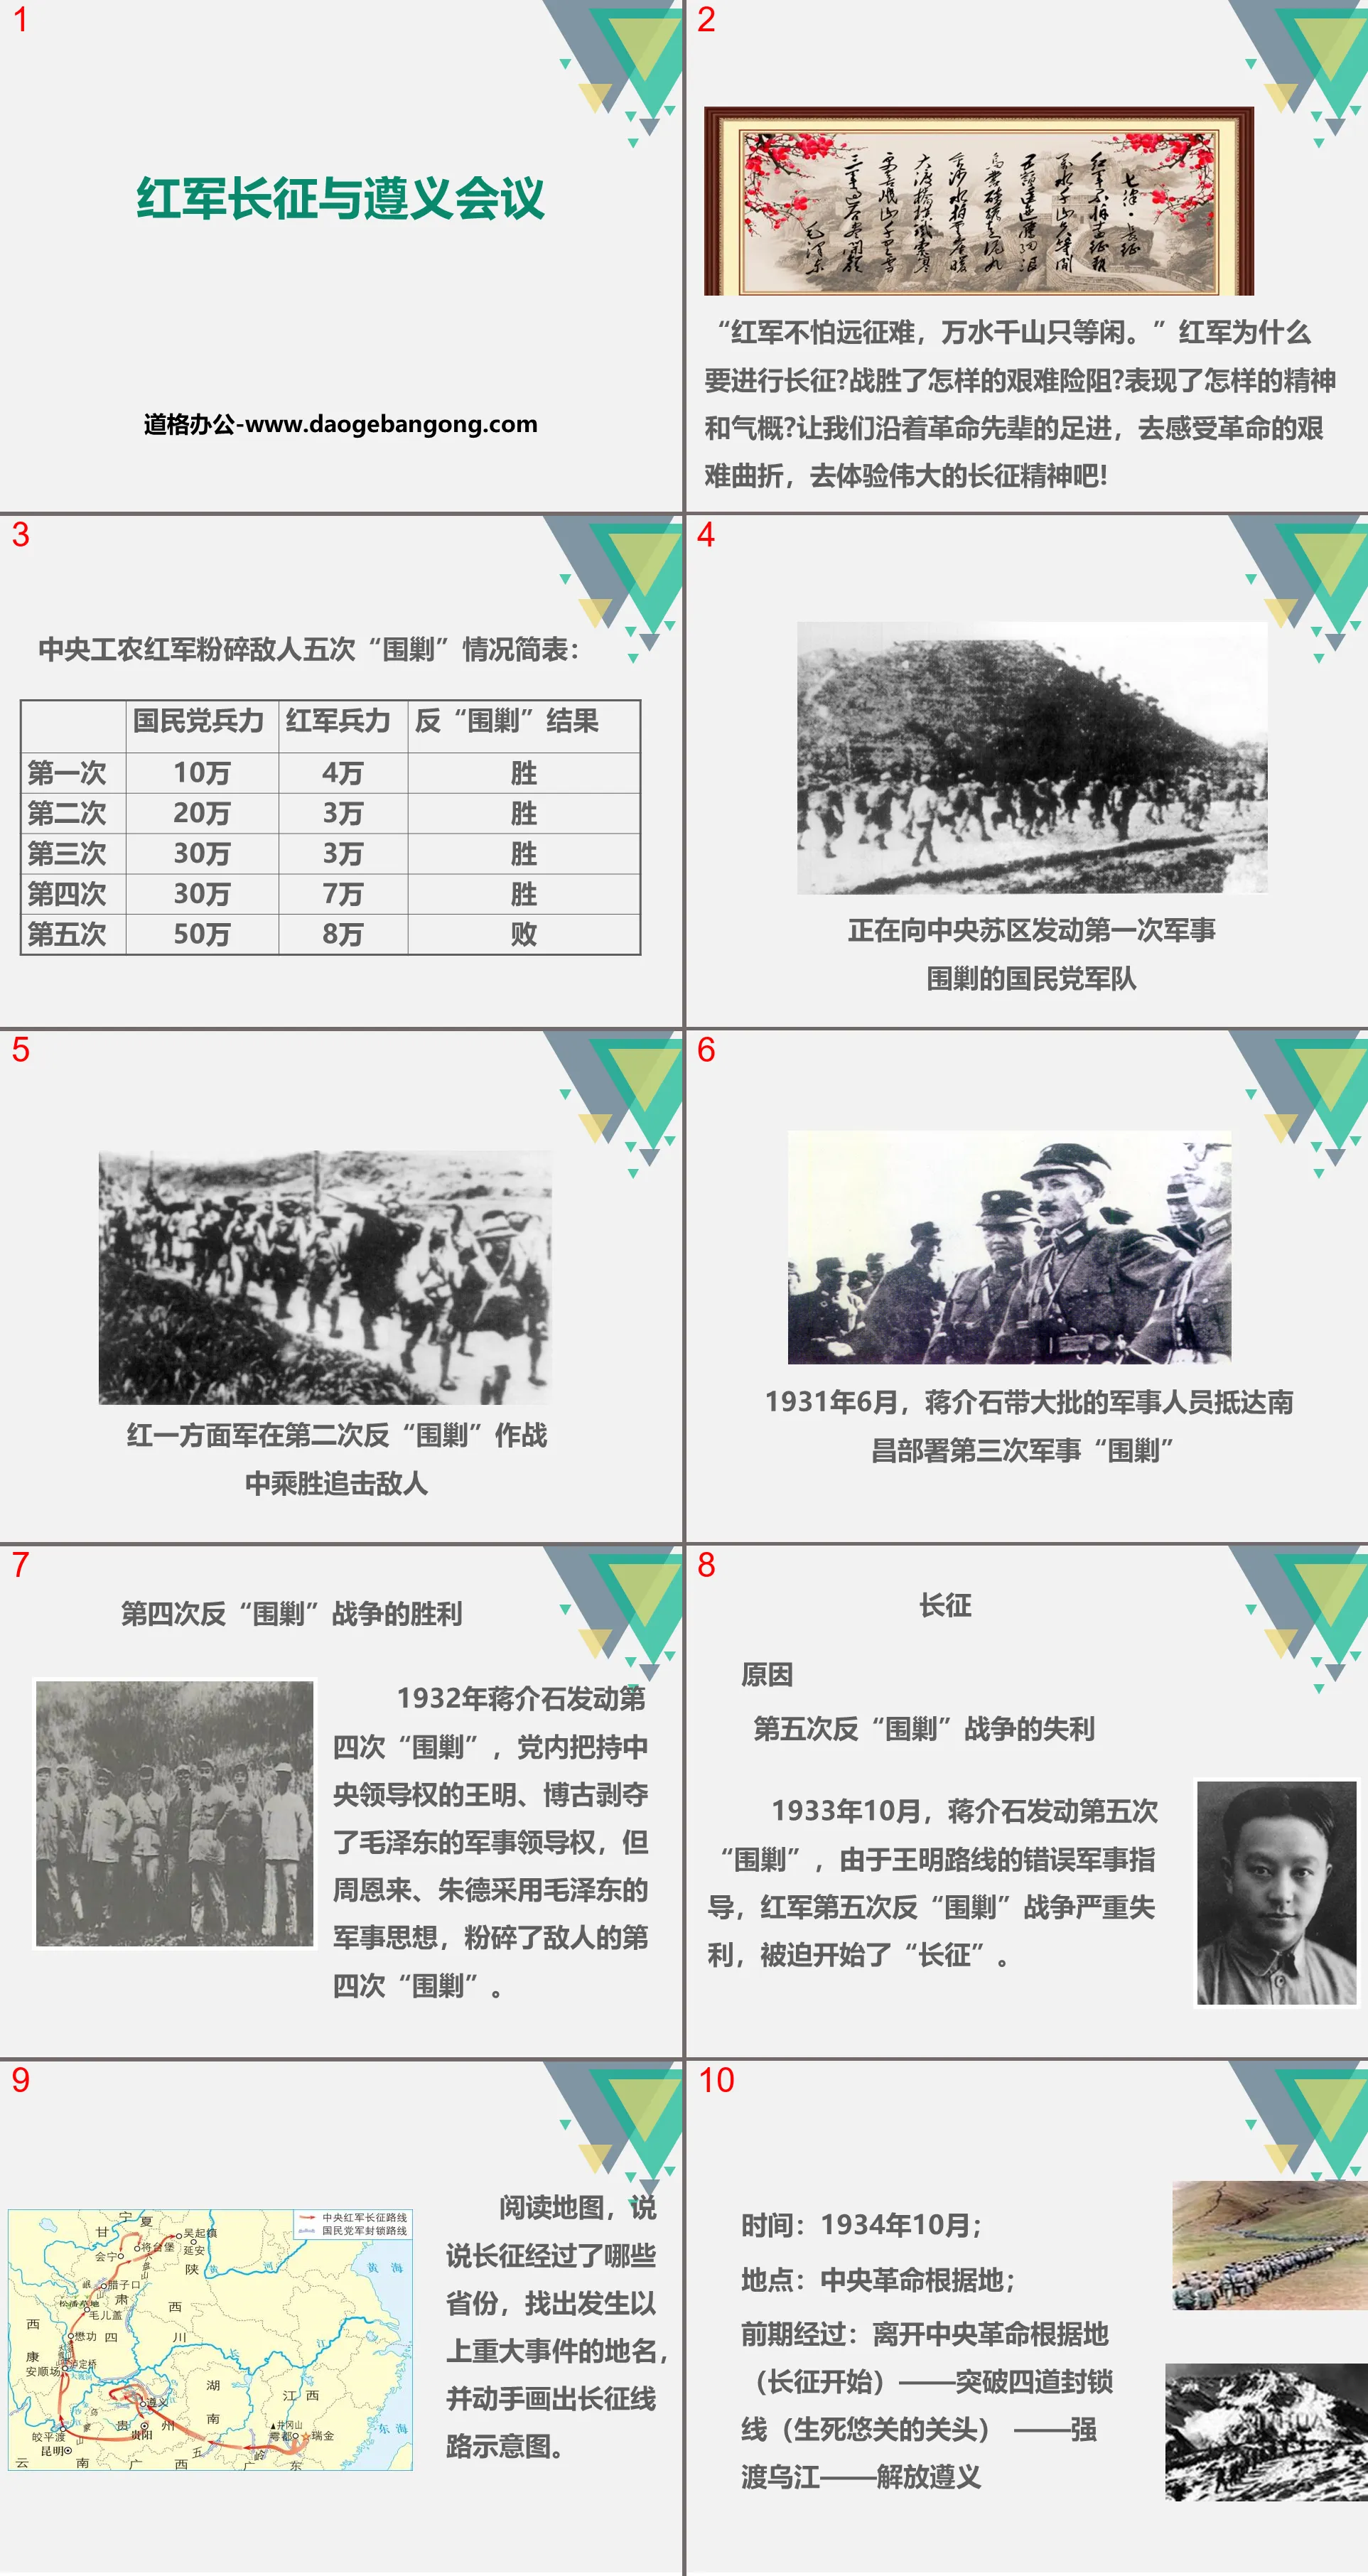 "The Red Army's Long March and Zunyi Conference" opens up a new development path PPT download